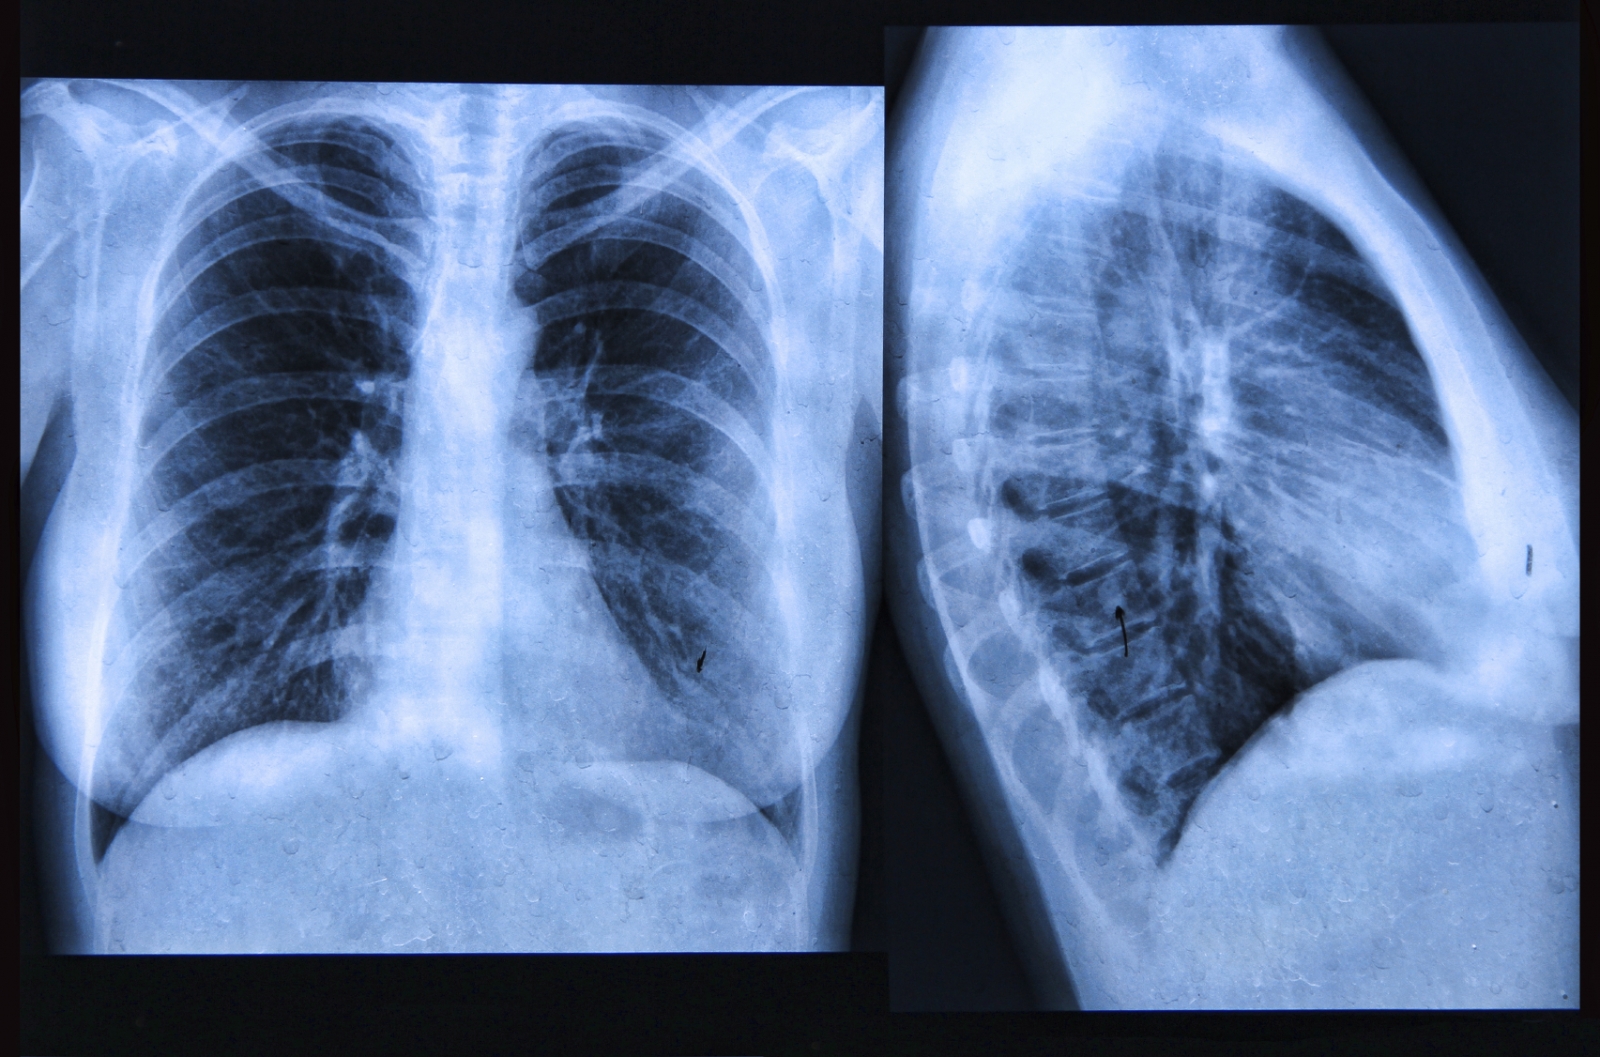 Cystic fibrosis gene therapy shows promising results for lung function